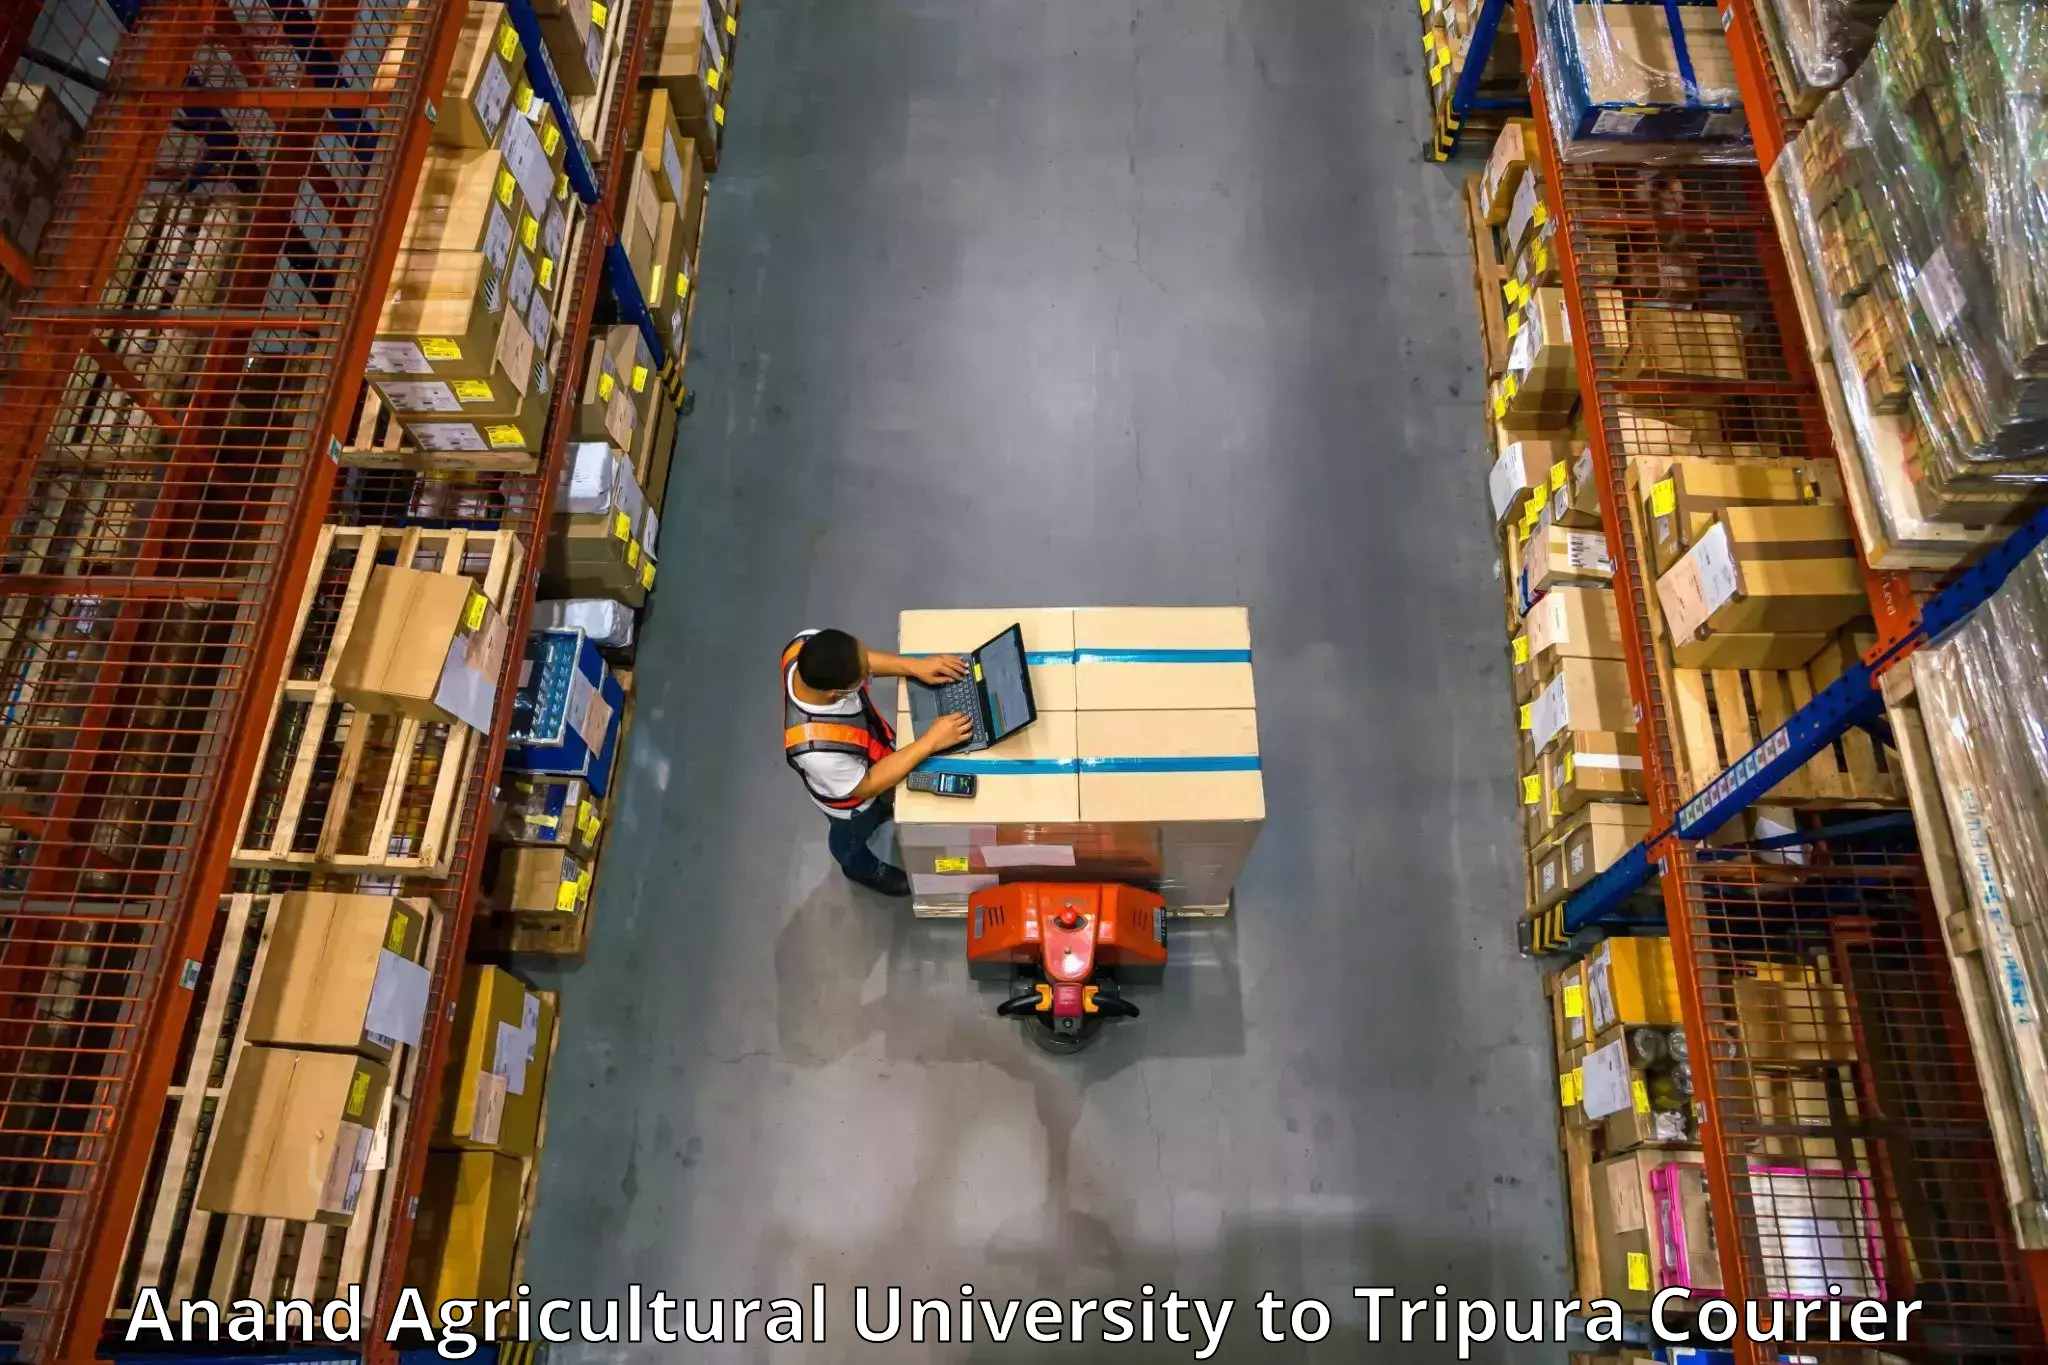 Furniture moving experts Anand Agricultural University to Tripura